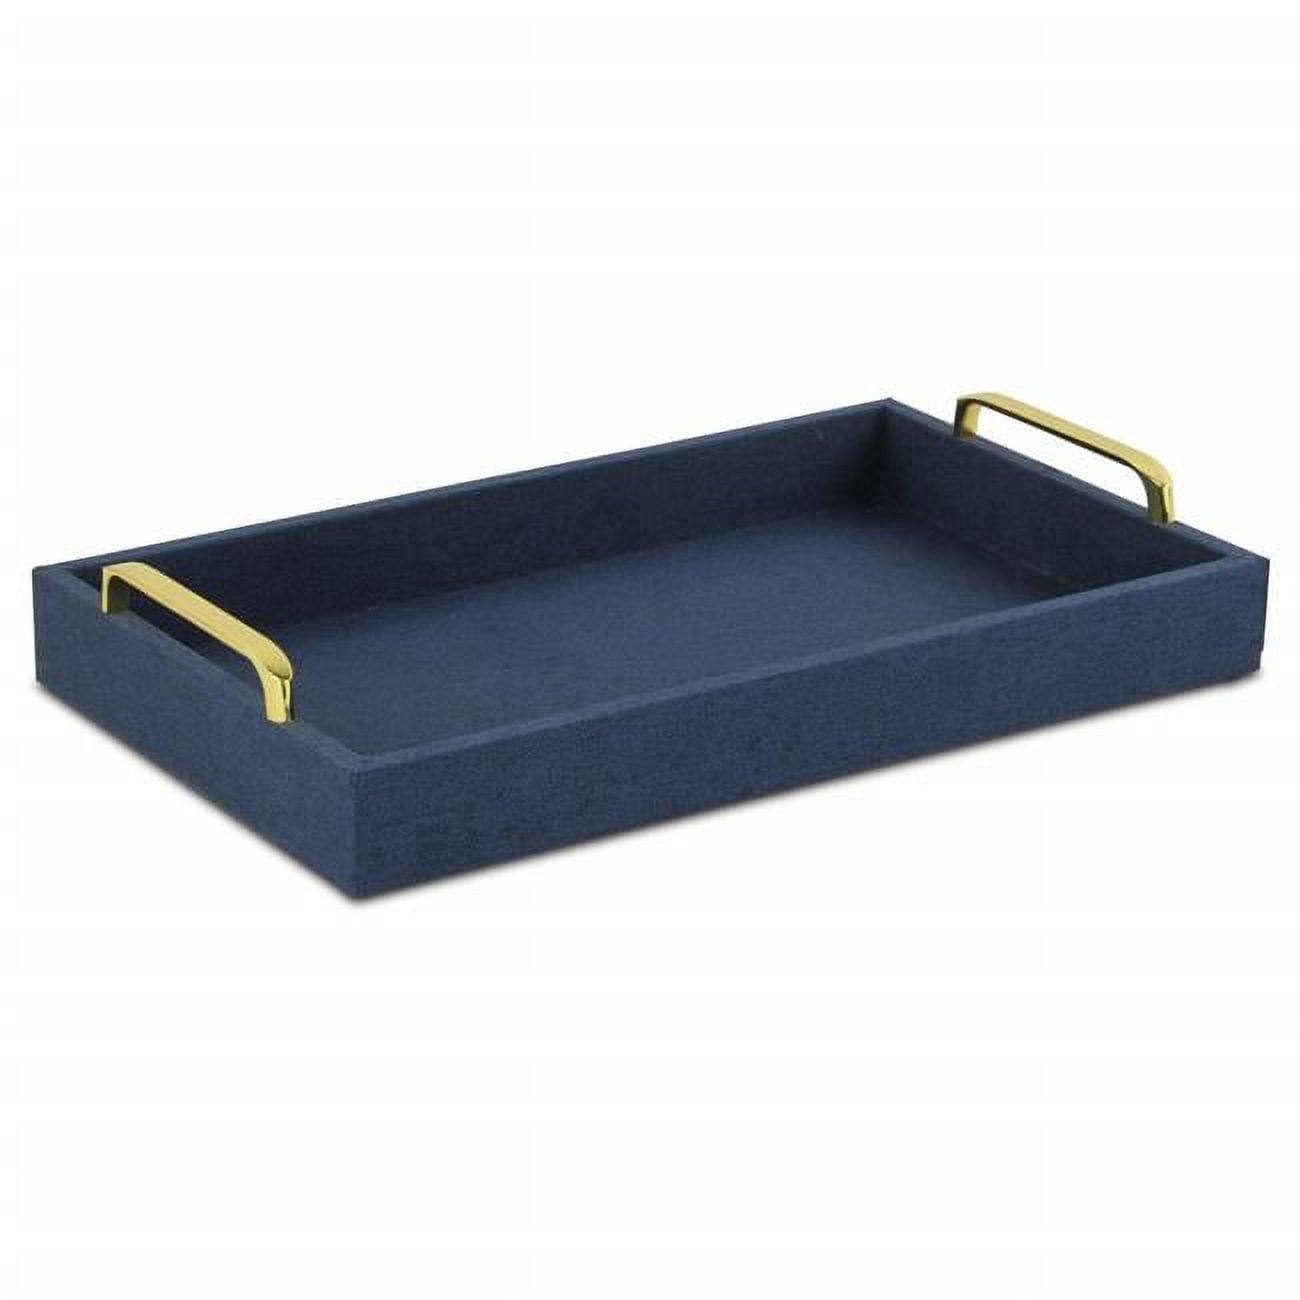 Wooden Nested Serving Trays with Handles - Bed Bath & Beyond